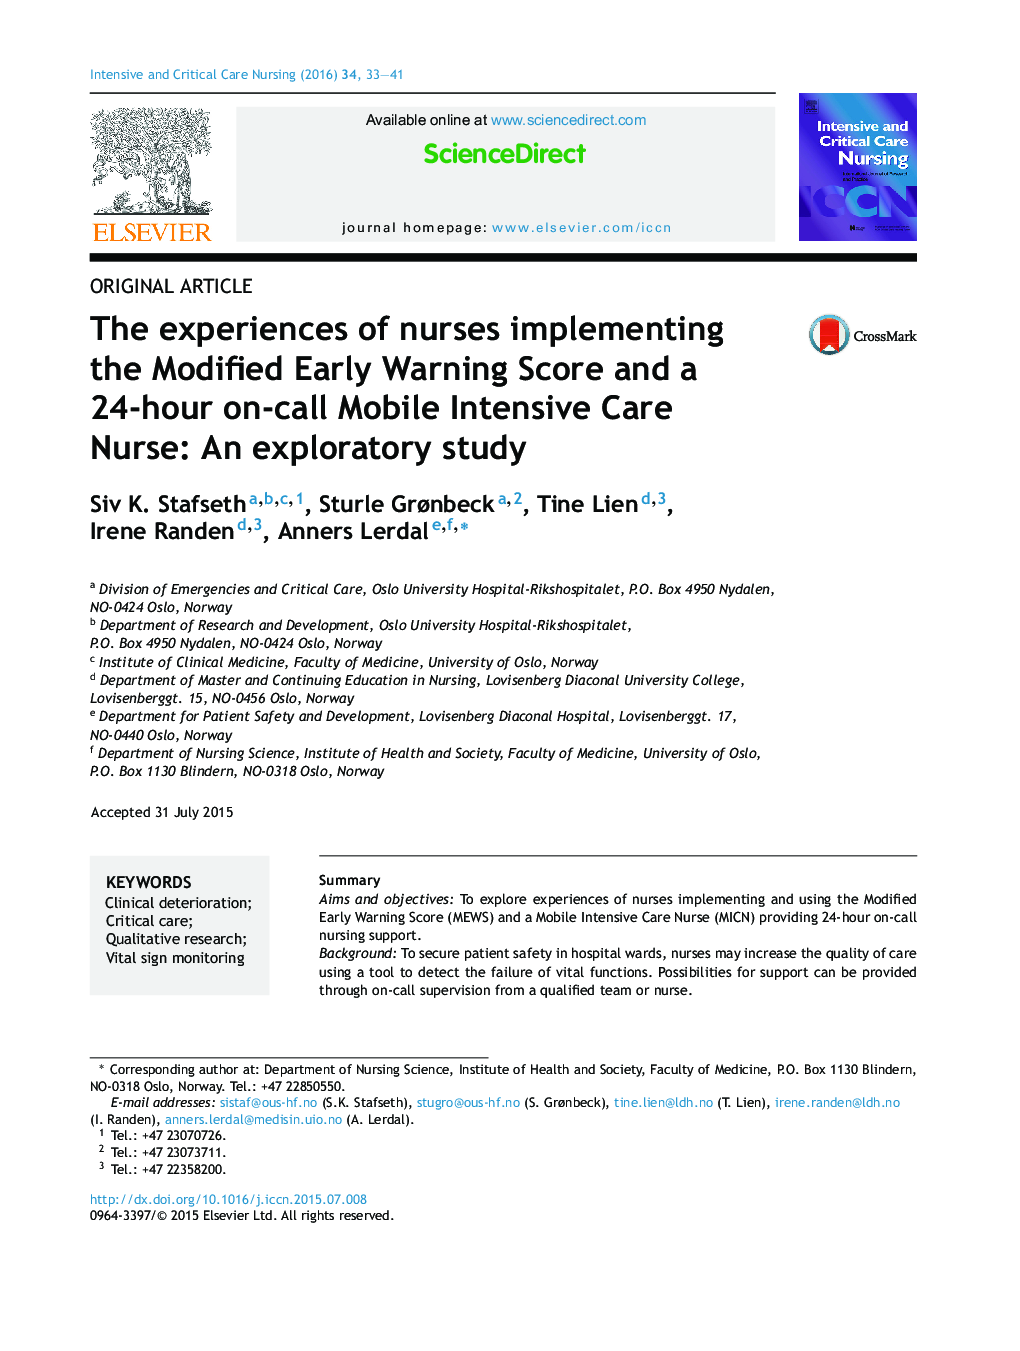 The experiences of nurses implementing the Modified Early Warning Score and a 24-hour on-call Mobile Intensive Care Nurse: An exploratory study